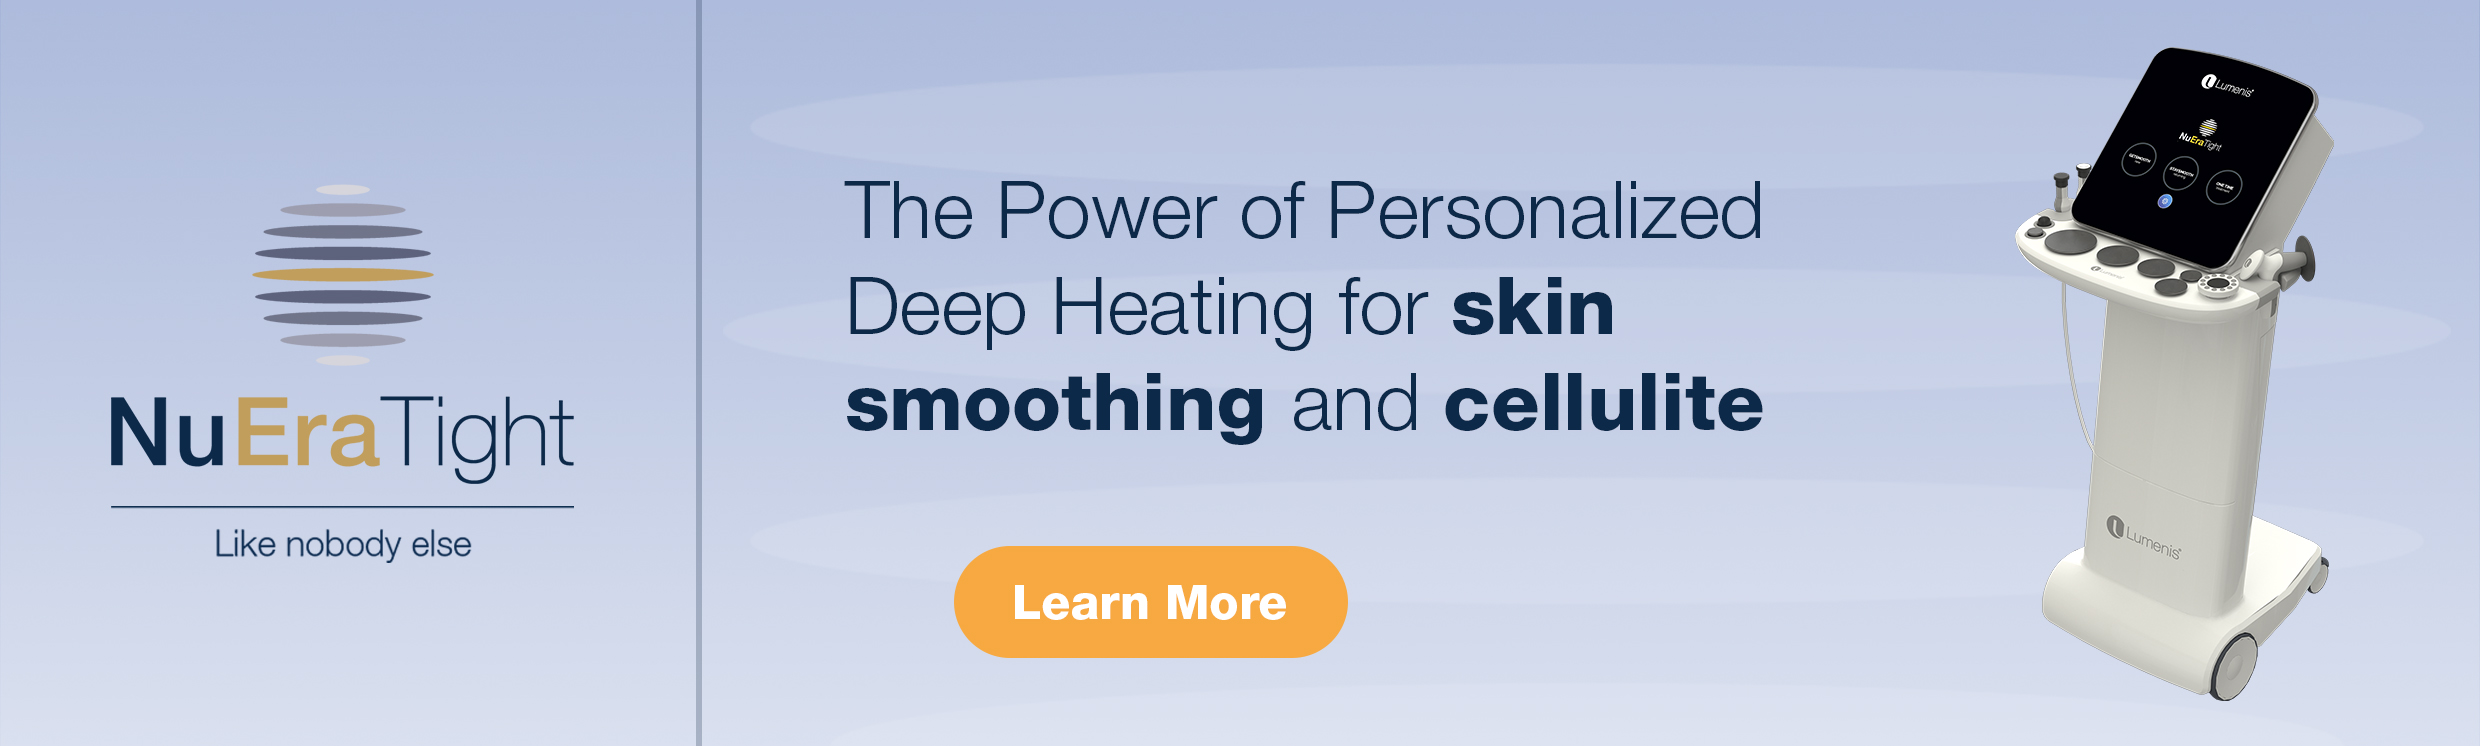 the power of personalized deep heating for skin smoothing and cellulite - banner